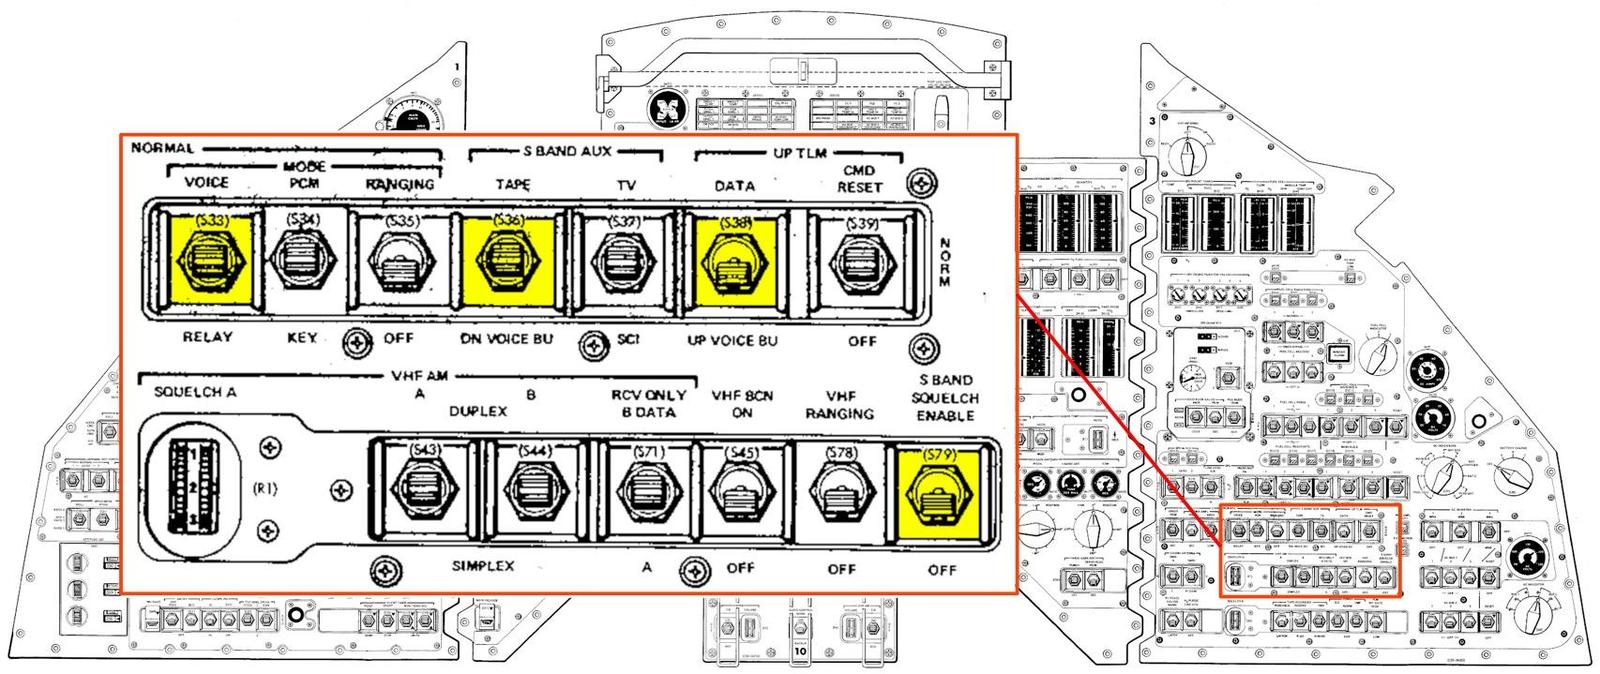 The Command Module's control panel with relevant switches highlighted.
  Diagram based on from Command/Service Module Systems Handbook p208.